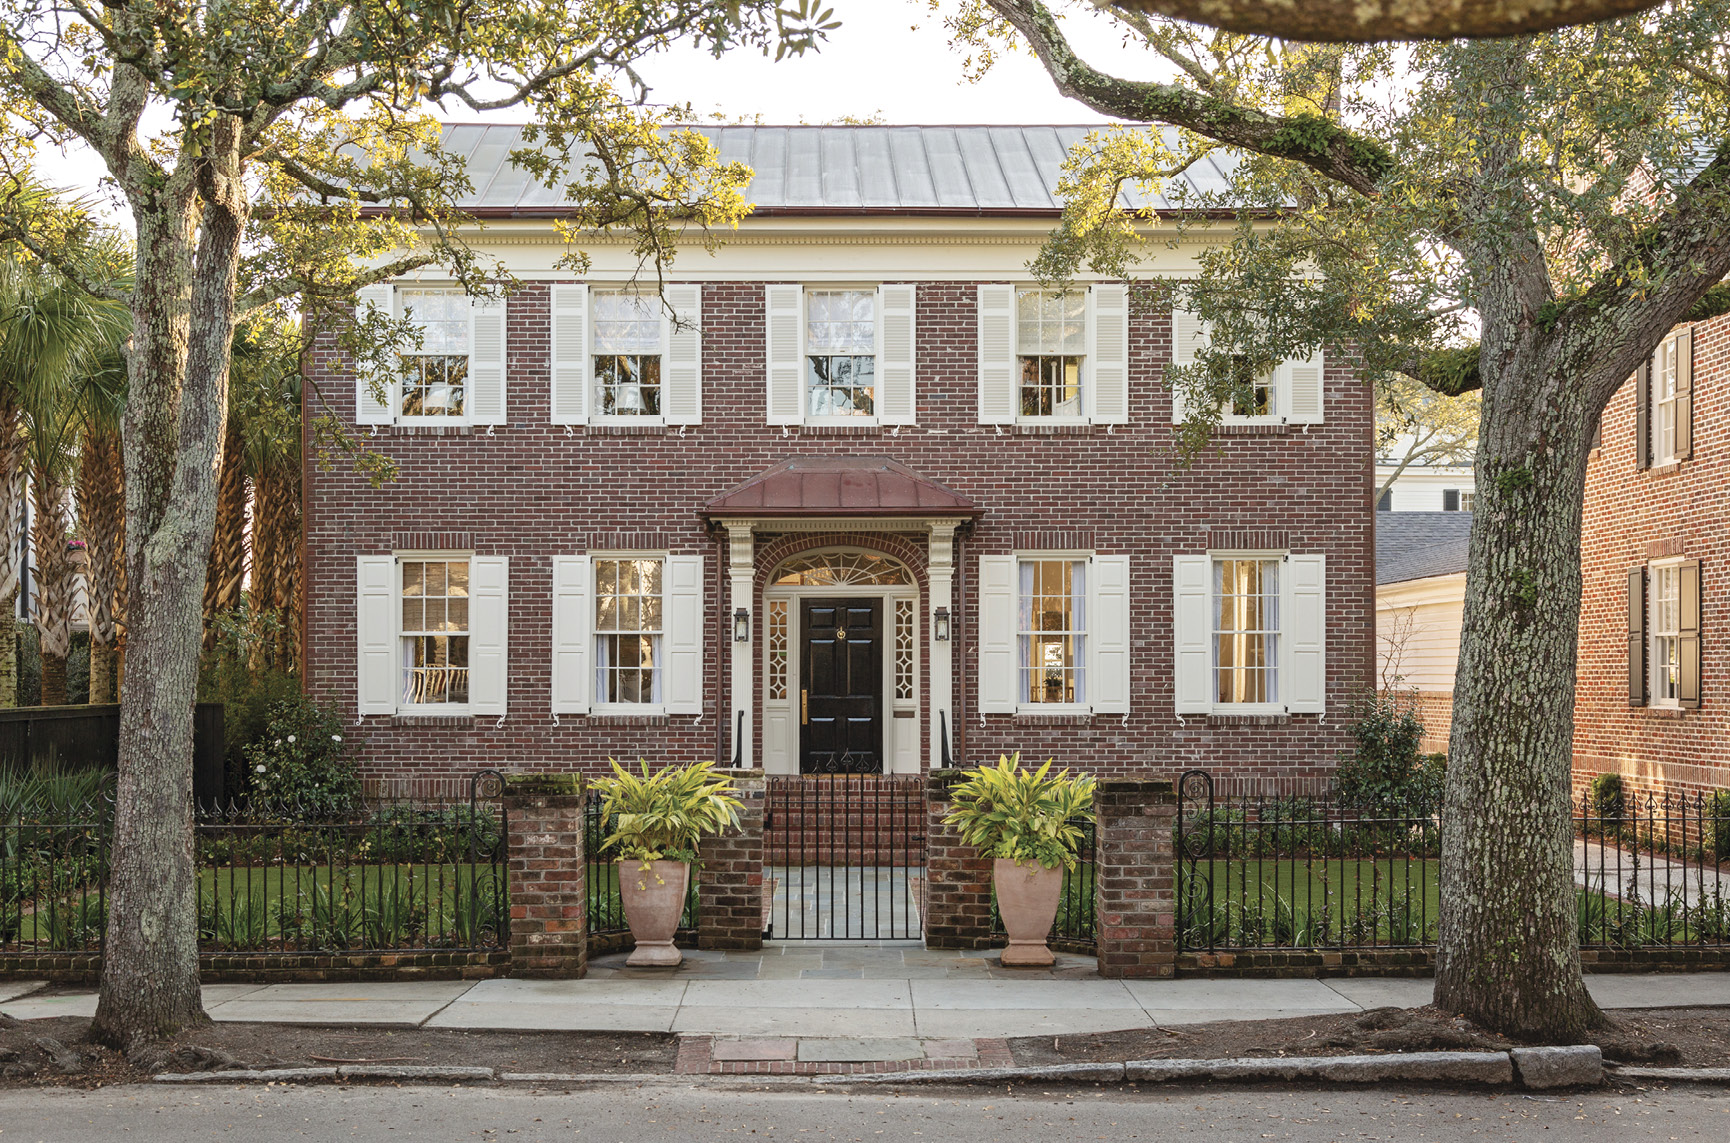 HIP TO BE SQUARE: Working with an architect, a builder, and an interior designer, Cate and Hugh Leatherman updated a boxy brick Colonial-style house South of Broad to suit their brood.   “I love how neighborhoody it feels here,” says Cate, who grew up around the corner. “It has a family vibe.”